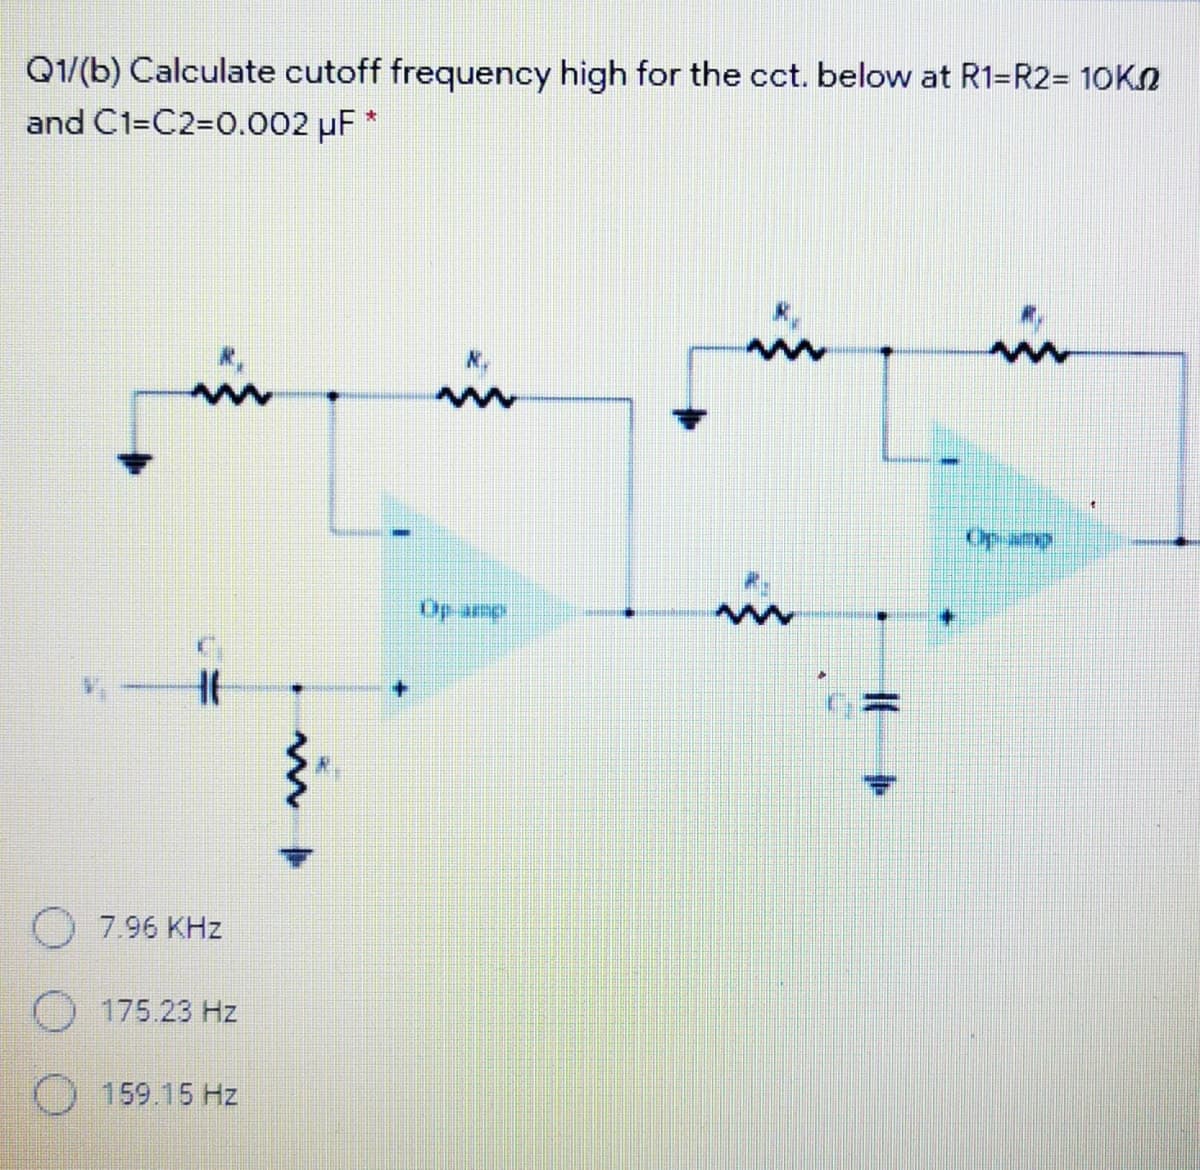 Q1/(b) Calculate cutoff frequency high for the cct. below at R1=R2= 10KO
and C1=C23D0.002 uF *
in
in
in
Op amp
in
Op amp
7.96 KHz
O 175.23 Hz
O159.15 Hz
